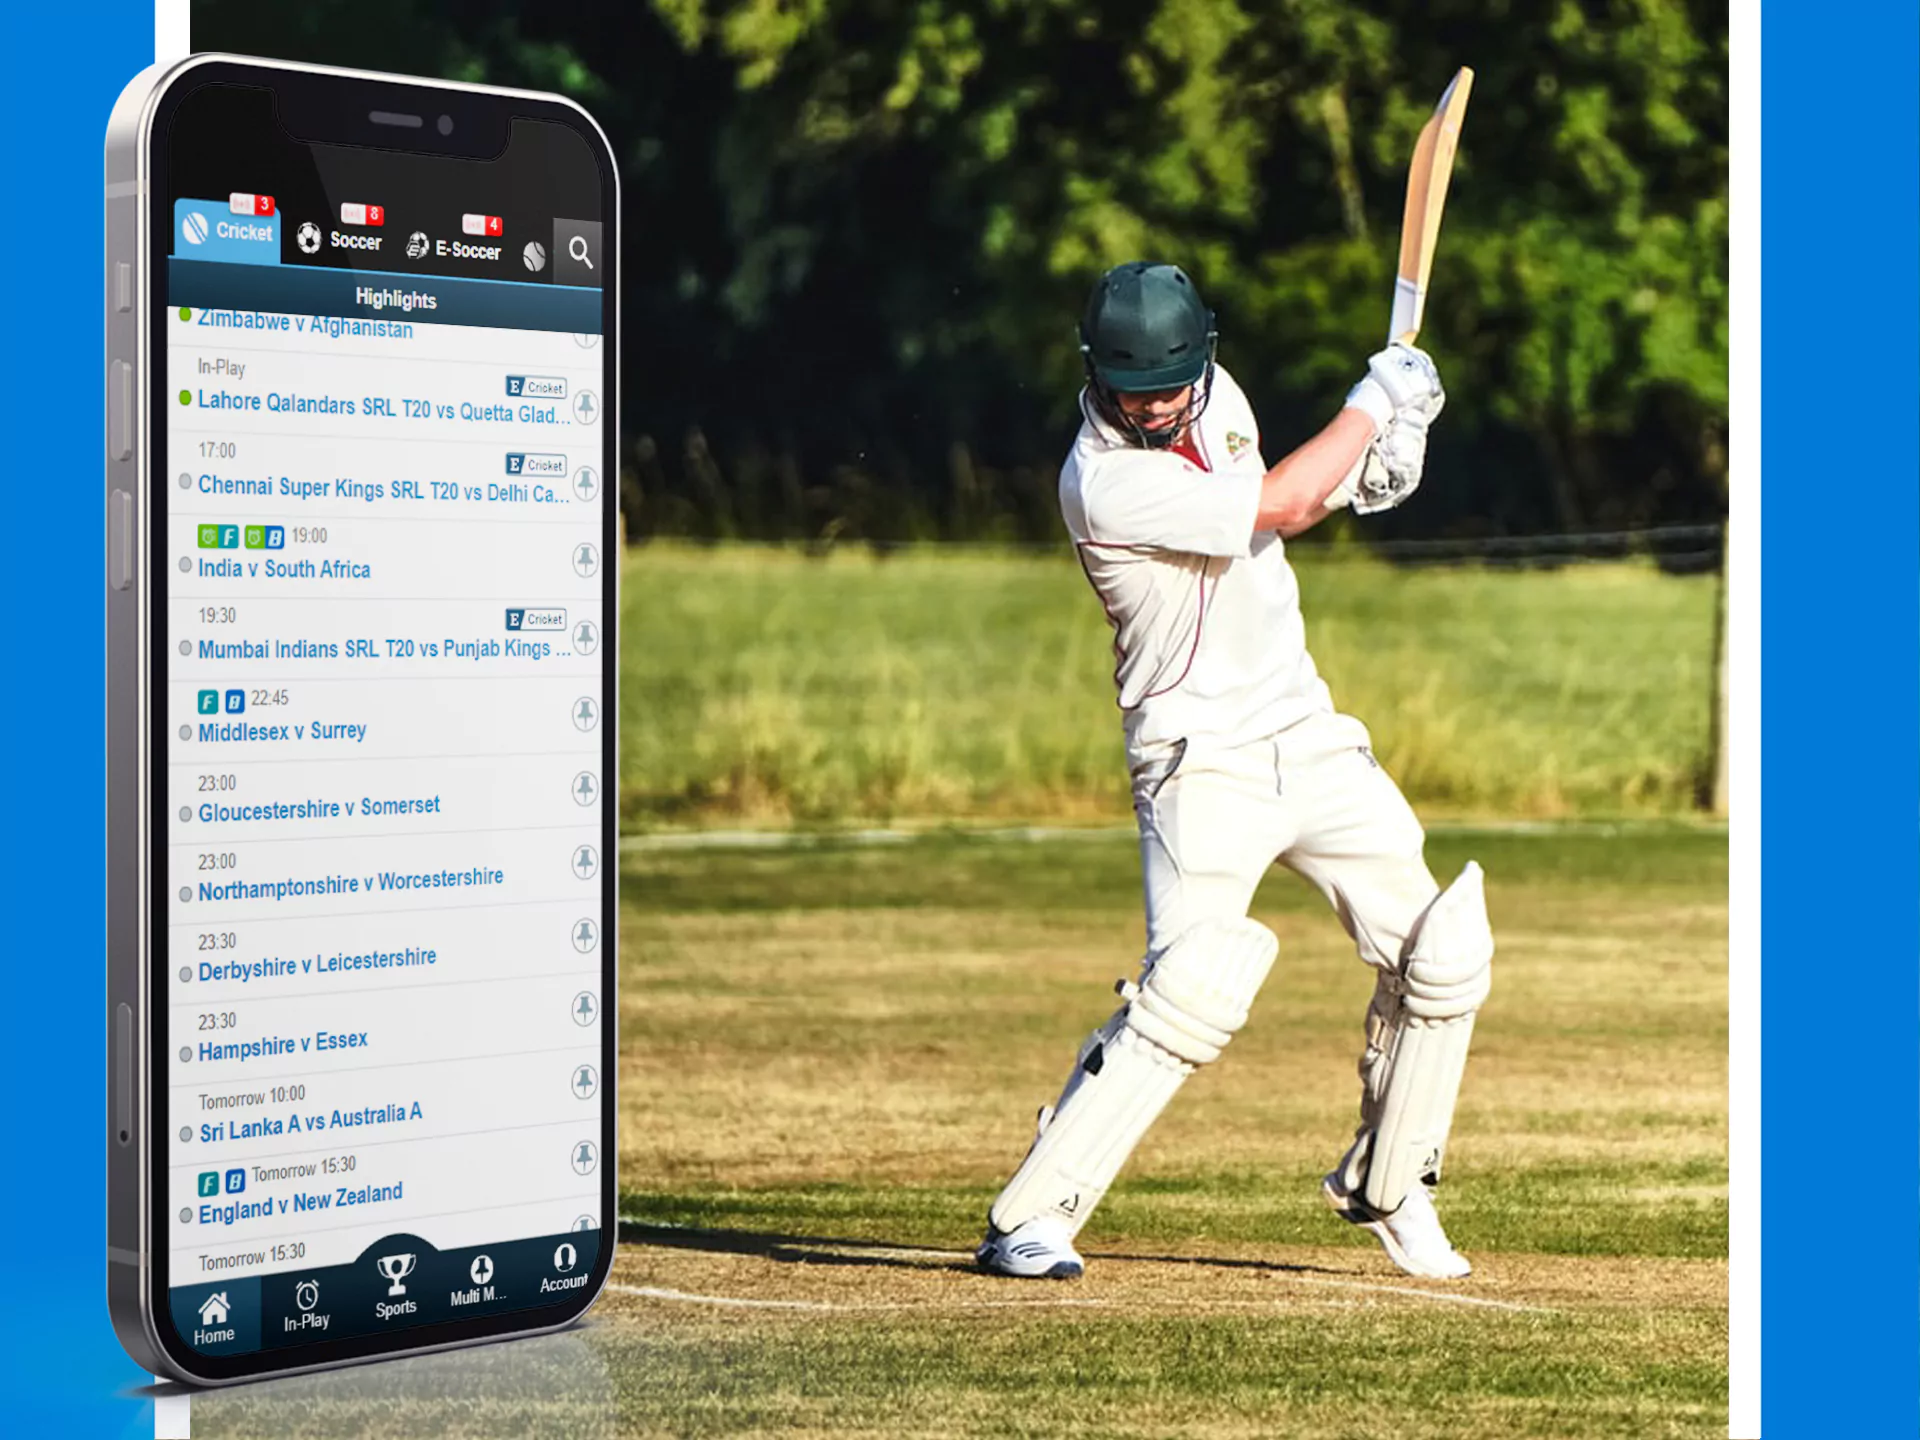 In the Crickex app, you can bet on cricket as well.